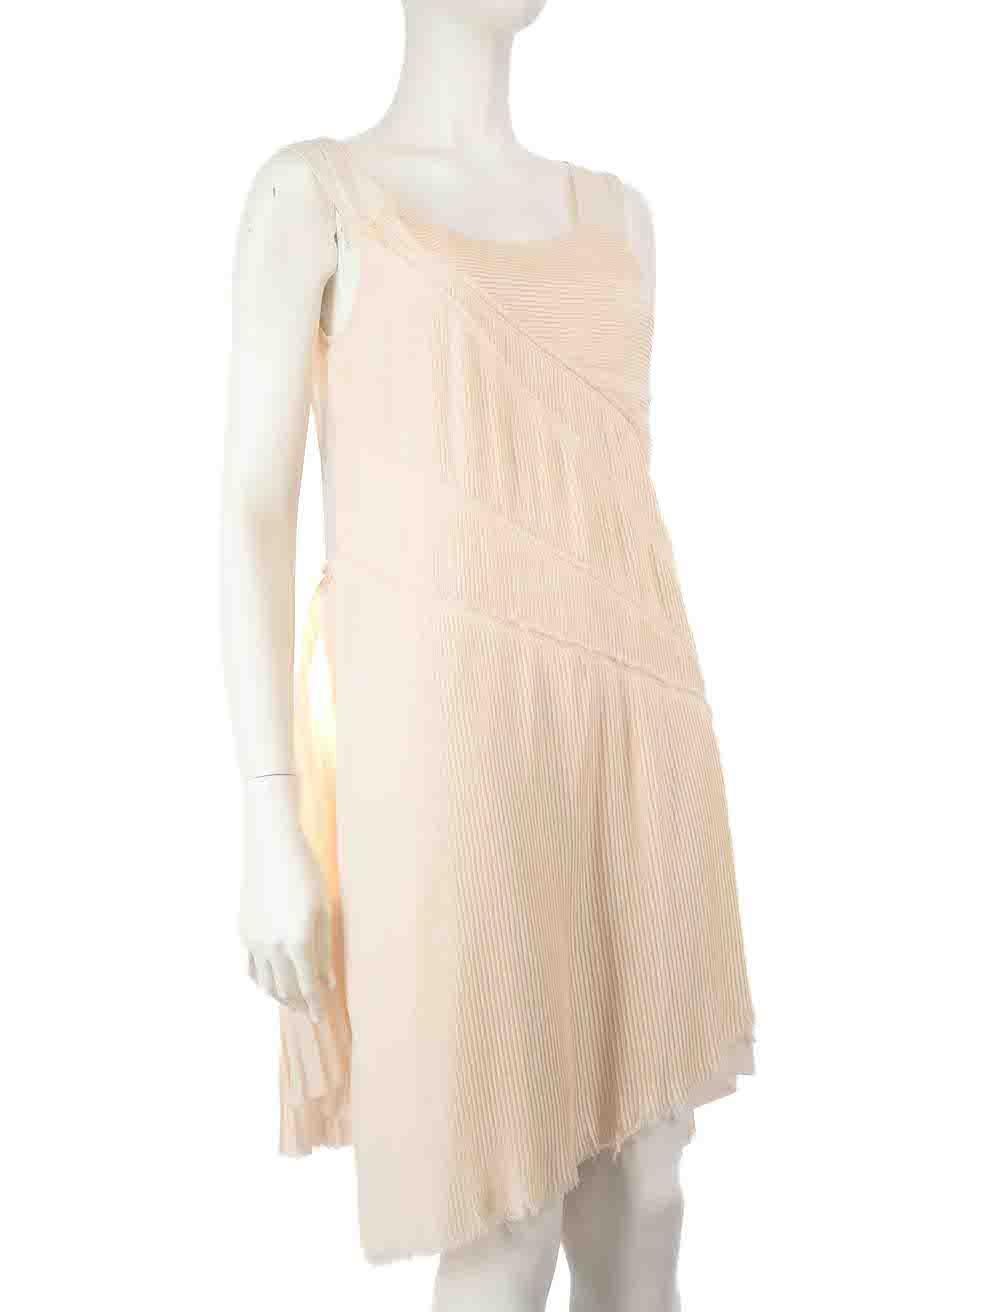 CONDITION is Very good. Minimal wear to the dress is evident. Minimal wear to the dress is seen with discolouration marks on the rear end and pulls to the weave on the hemline on this used Acne Studios designer resale item.
 
 
 
 Details
 
 
 Light